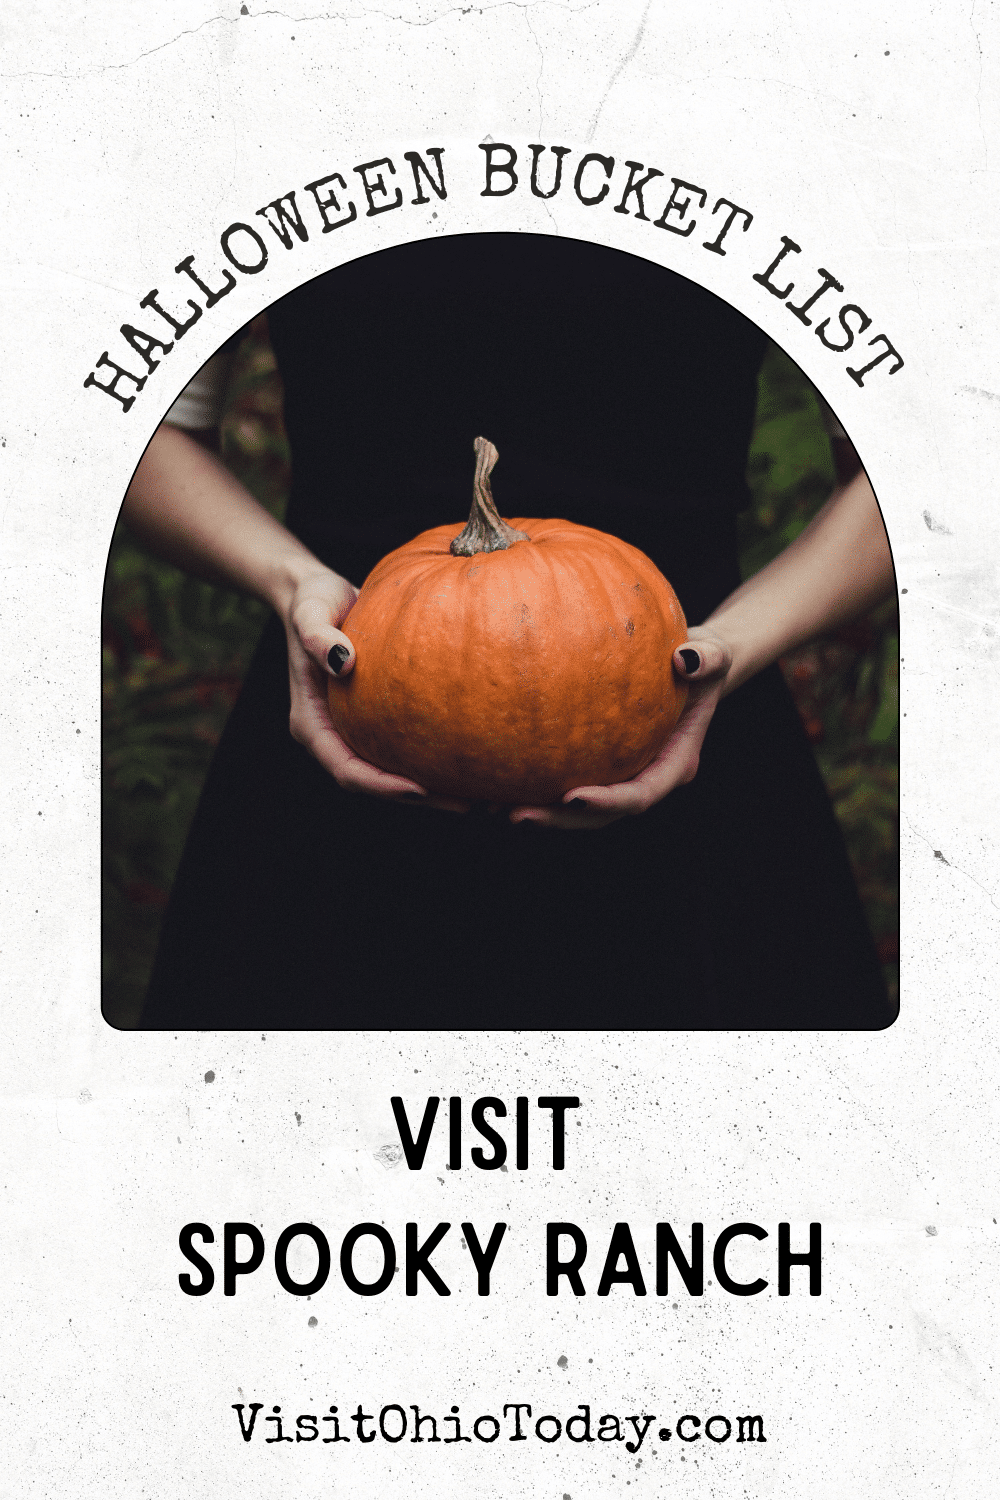 Spooky Ranch, located in Ohio, features 5 haunted attractions and is rated one of the best in the US.